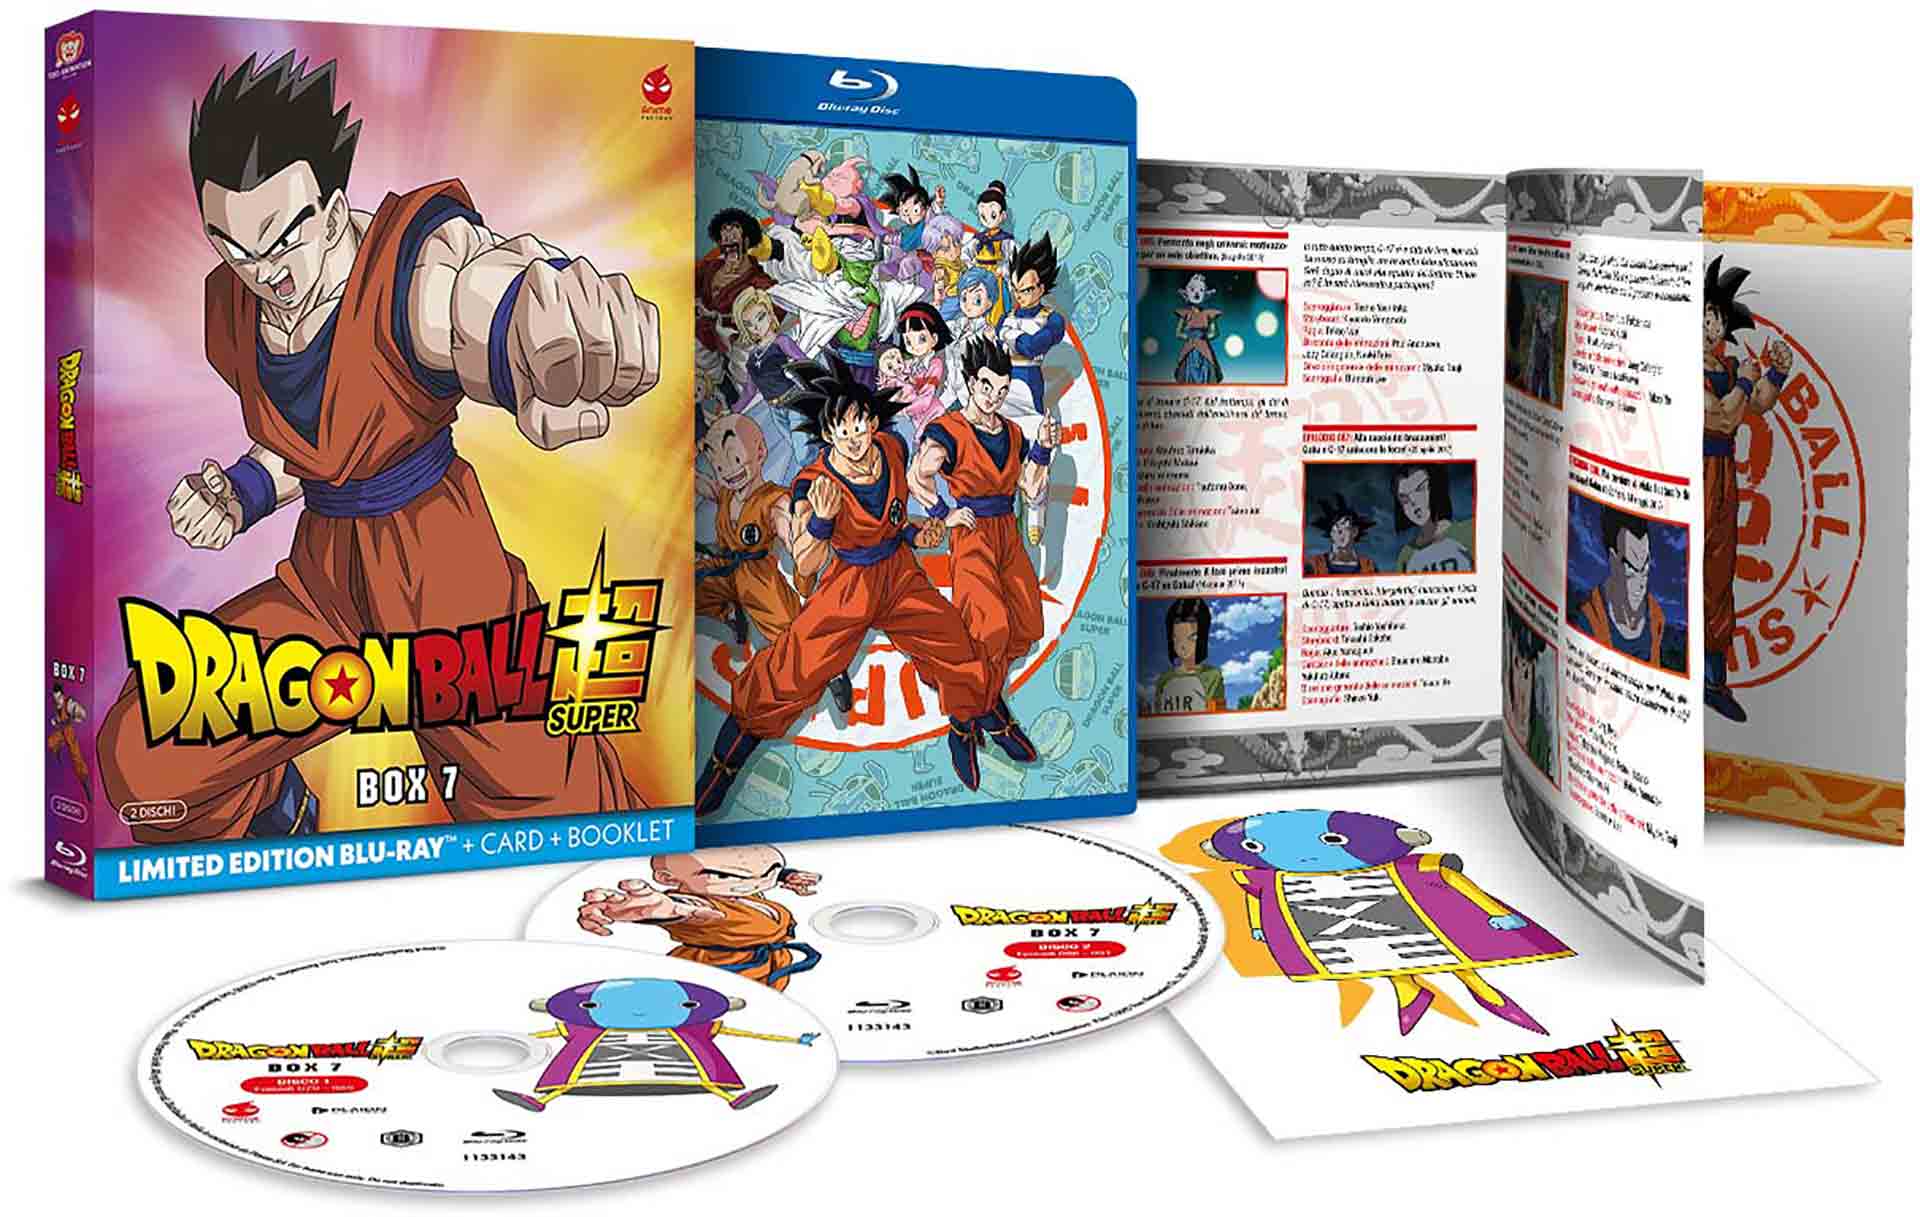 Dragon Ball Super - Volume 7 - Limited Edition 2 Blu-ray + Card + Booklet (Blu-ray) Image 2